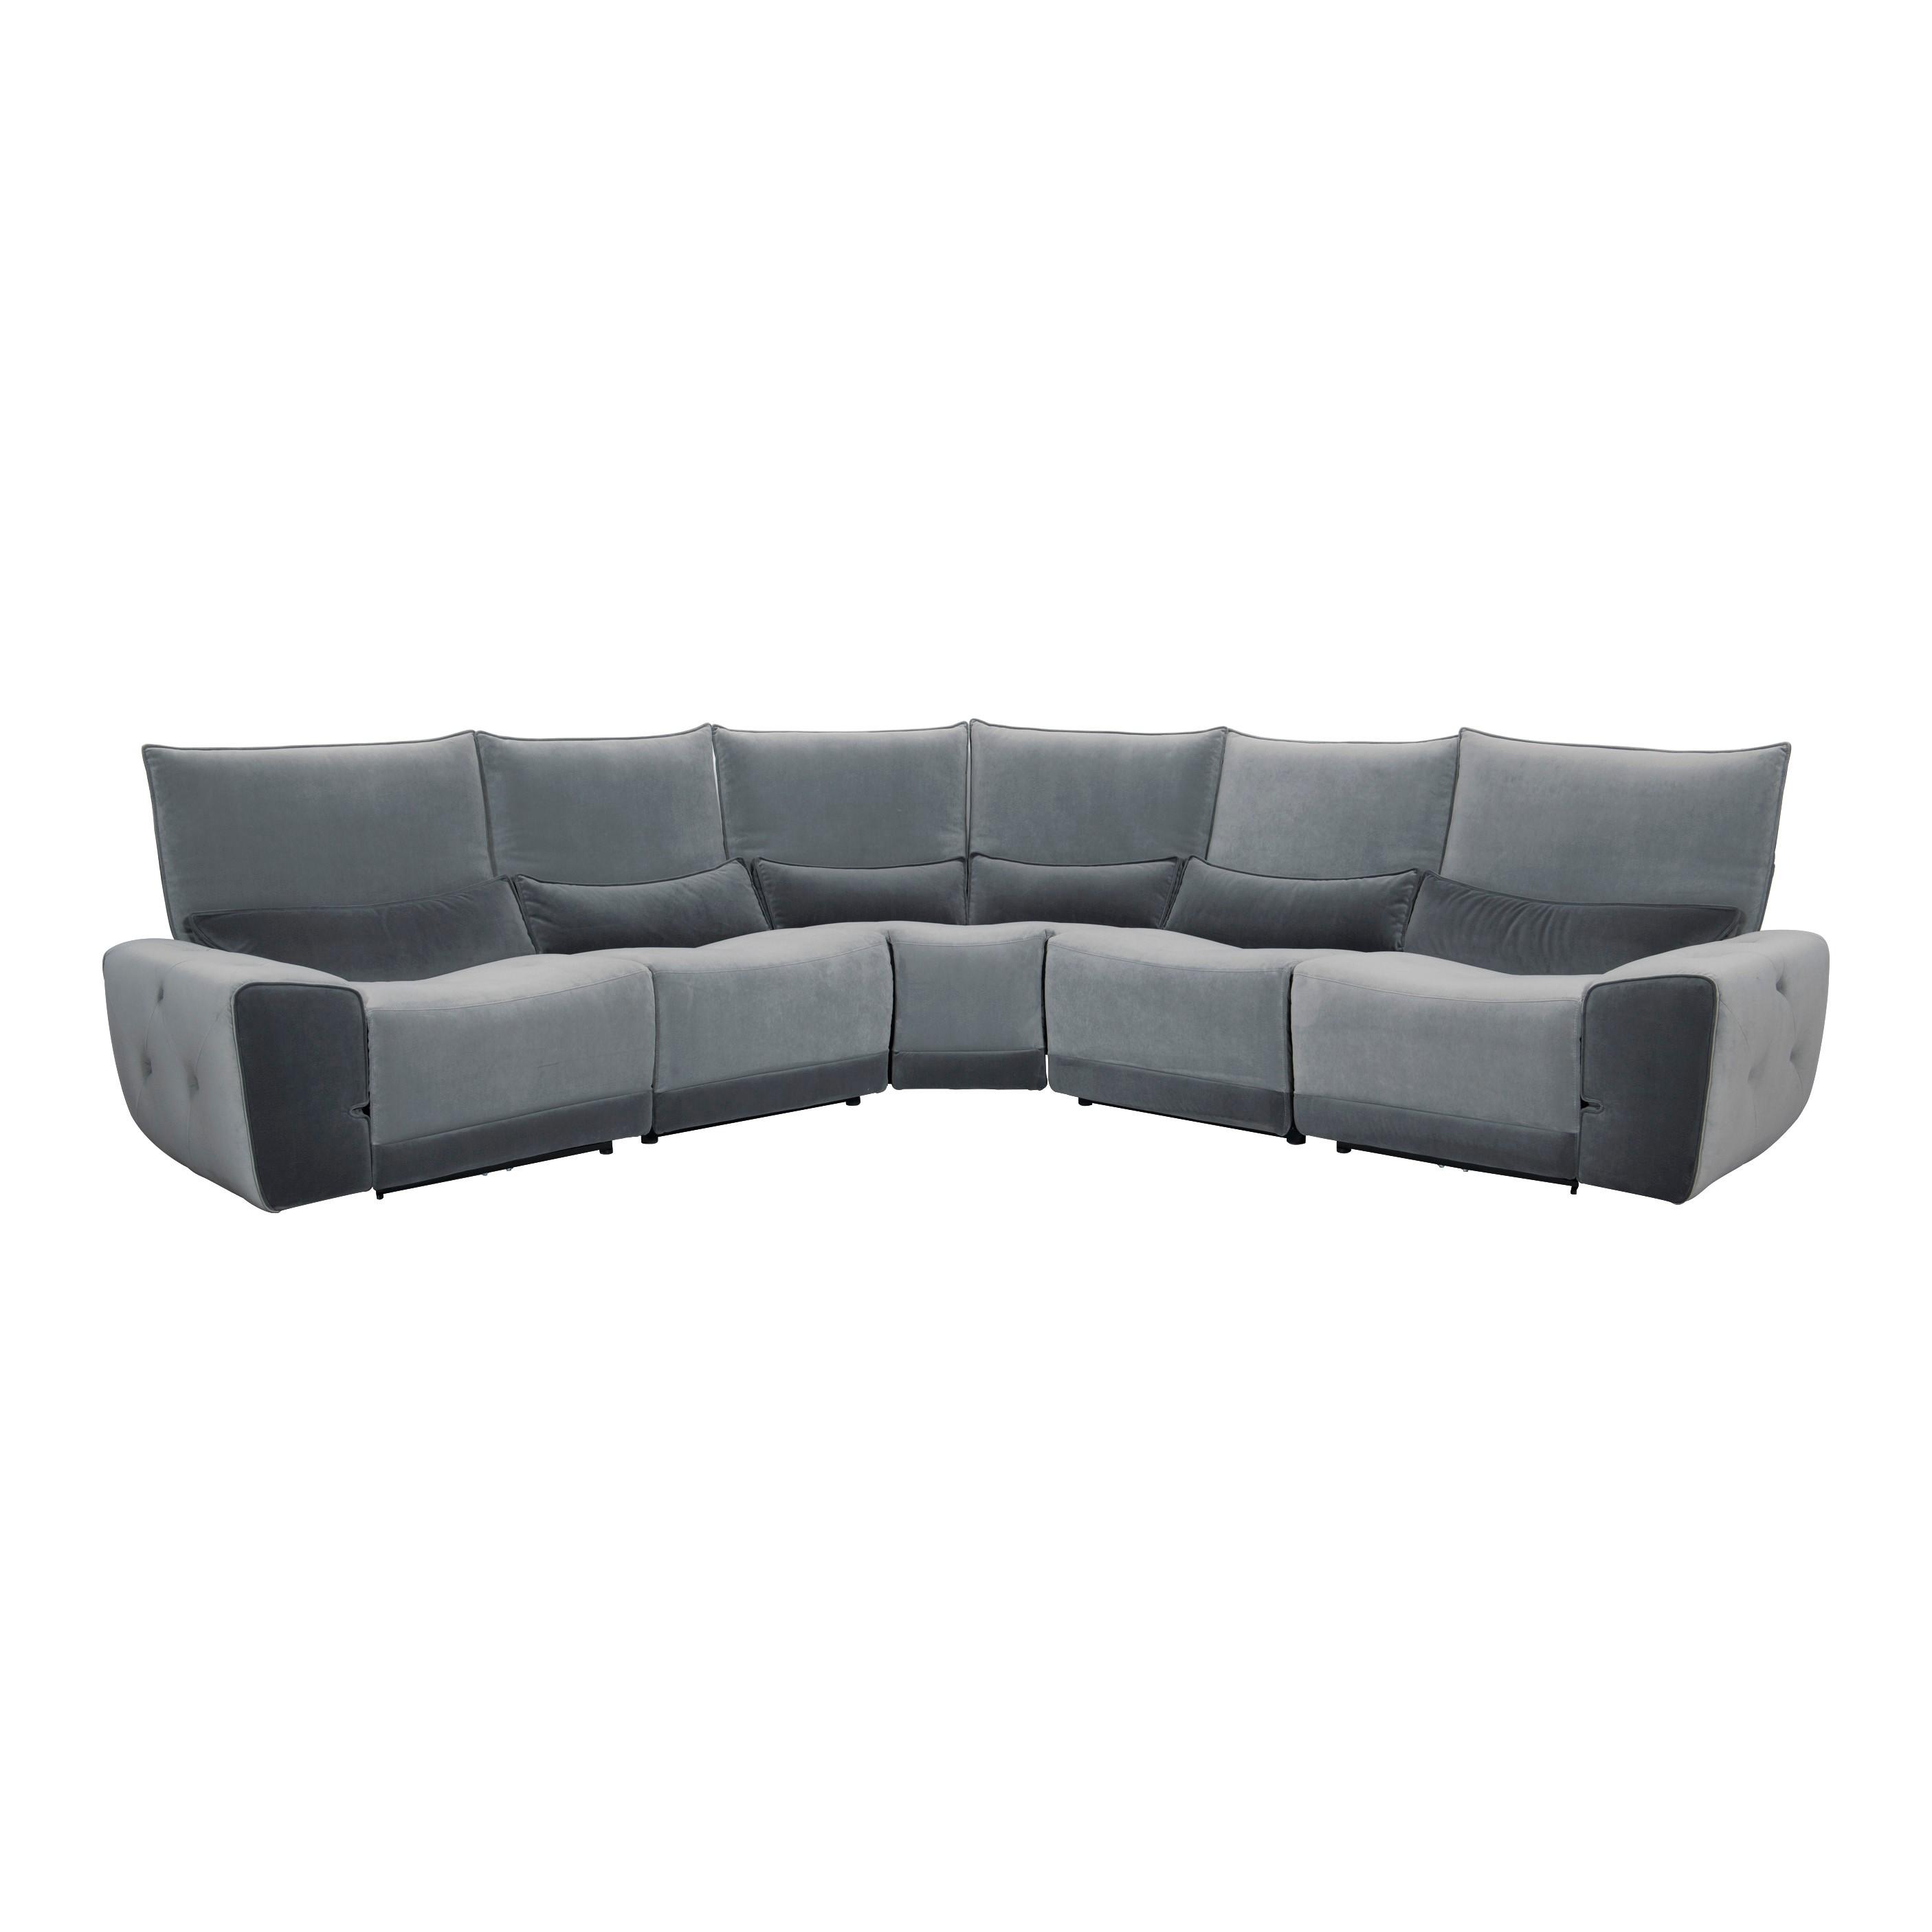 Modern Power Reclining Sectional 9459GY*5SCPW Helix 9459GY*5SCPW in Gray Velvet